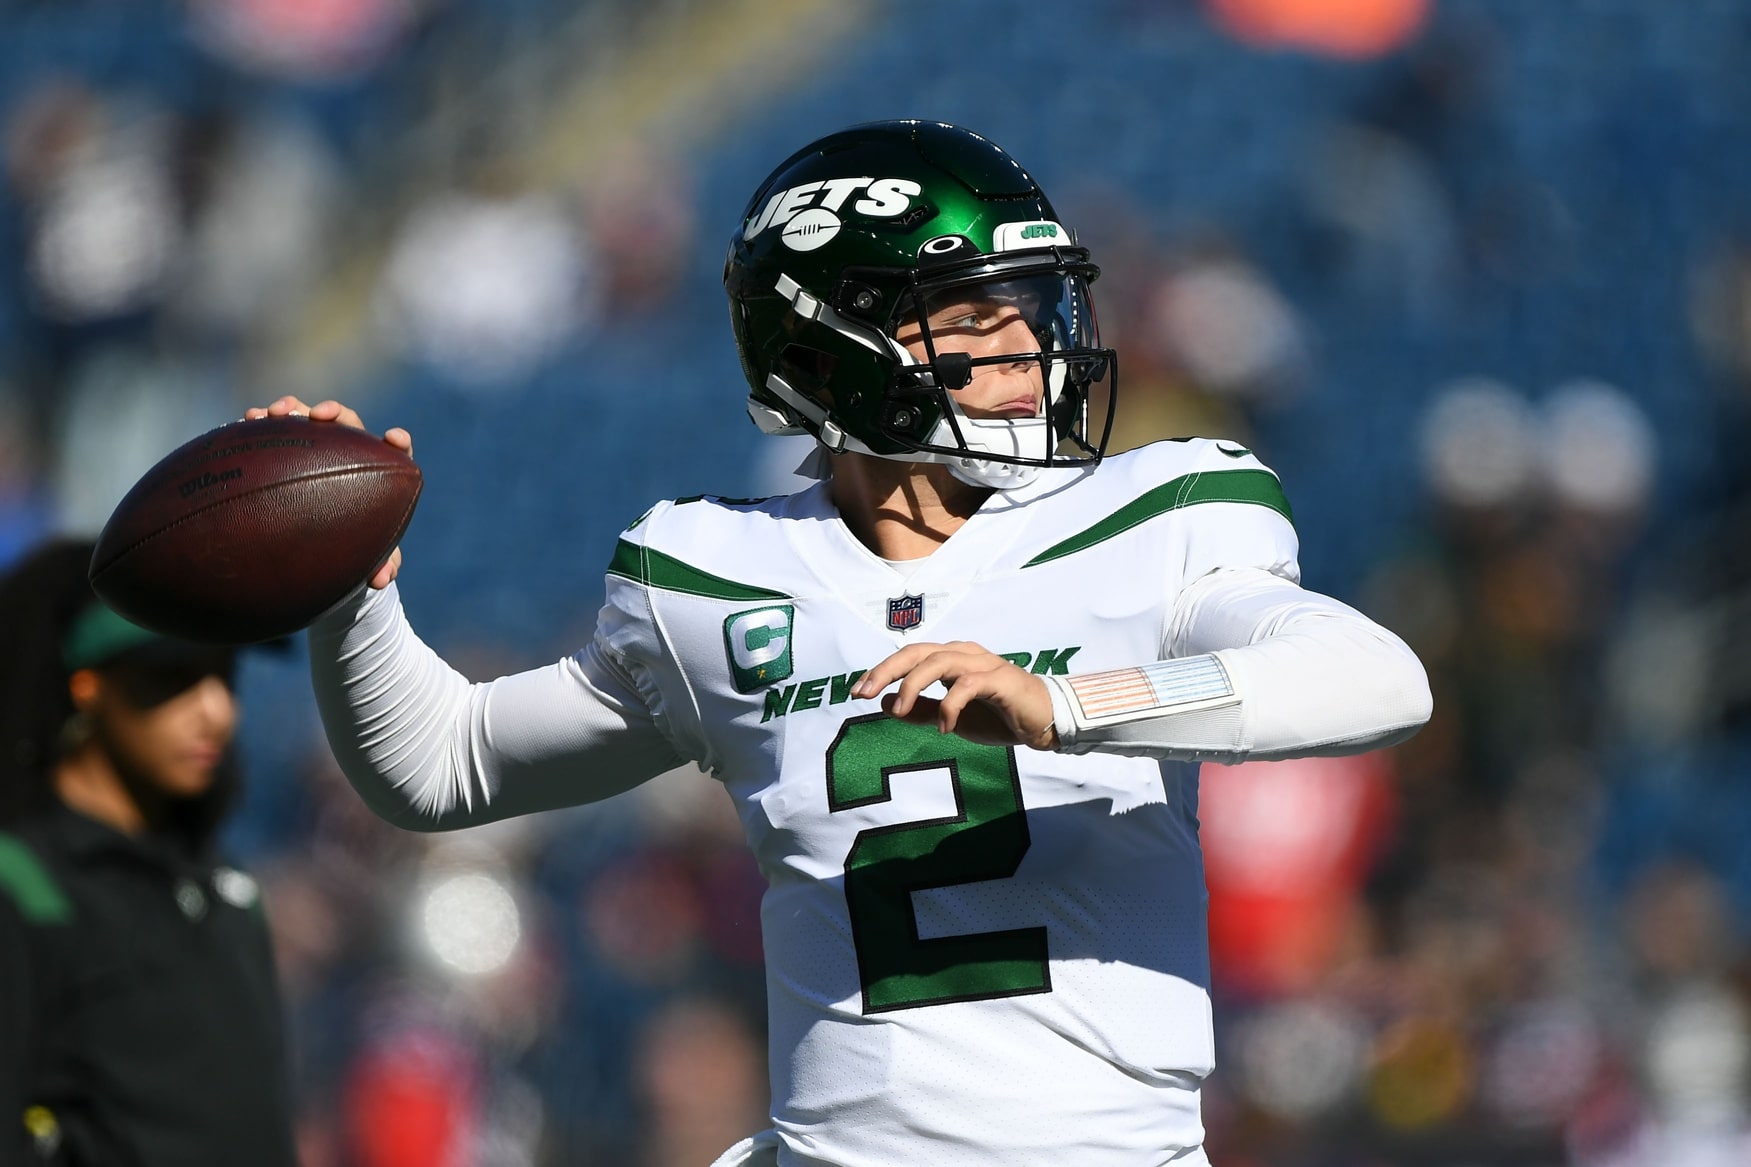 New York Jets quarterback Zach Wilson (2) throws a ball before the start of a game against the New England Patriots at Gillette Stadium.